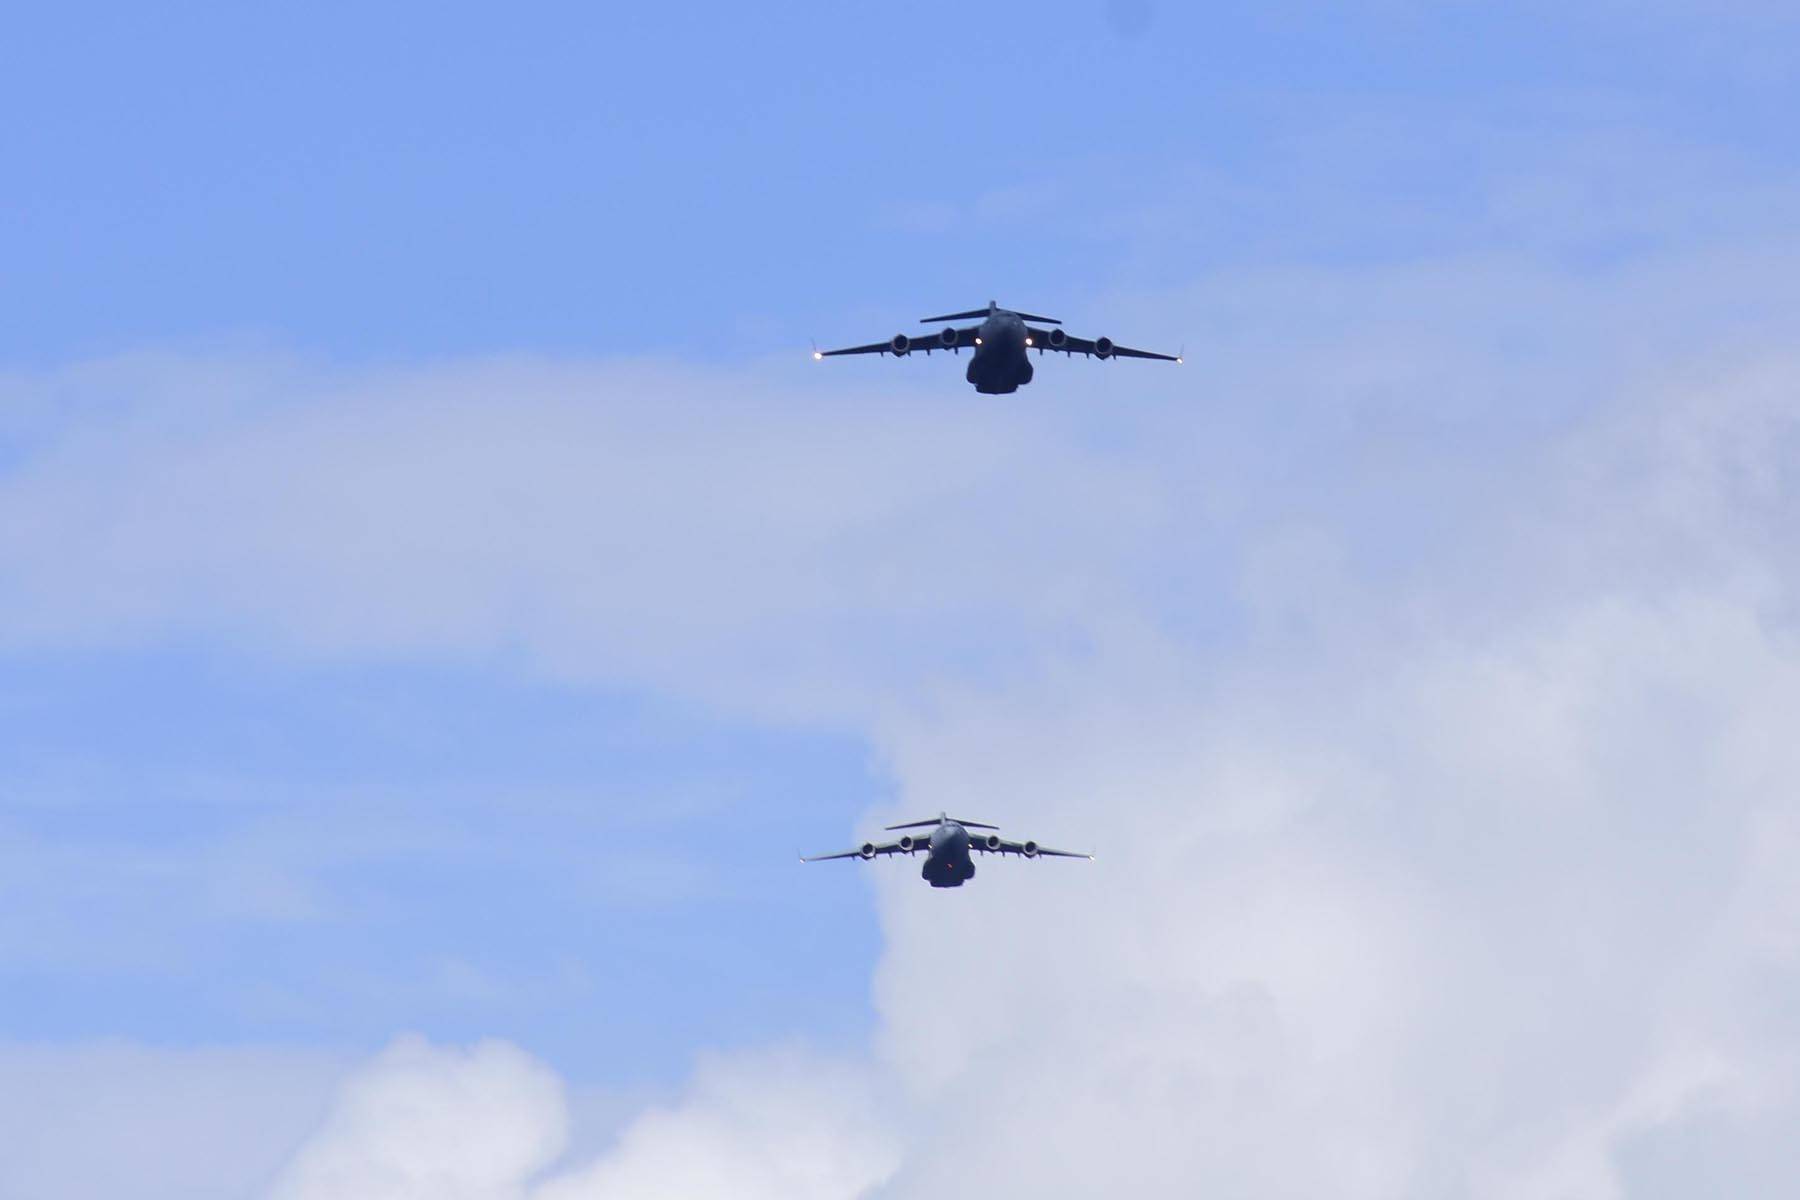 C-17 Globemaster III cargo planes from Joint Base Elmendorf-Richardson performed a flyby over Juneau on May 15, 2020, to support the efforts of medical and emergency personnel in the face of the coronavirus. (Peter Segall | Juneau Empire)